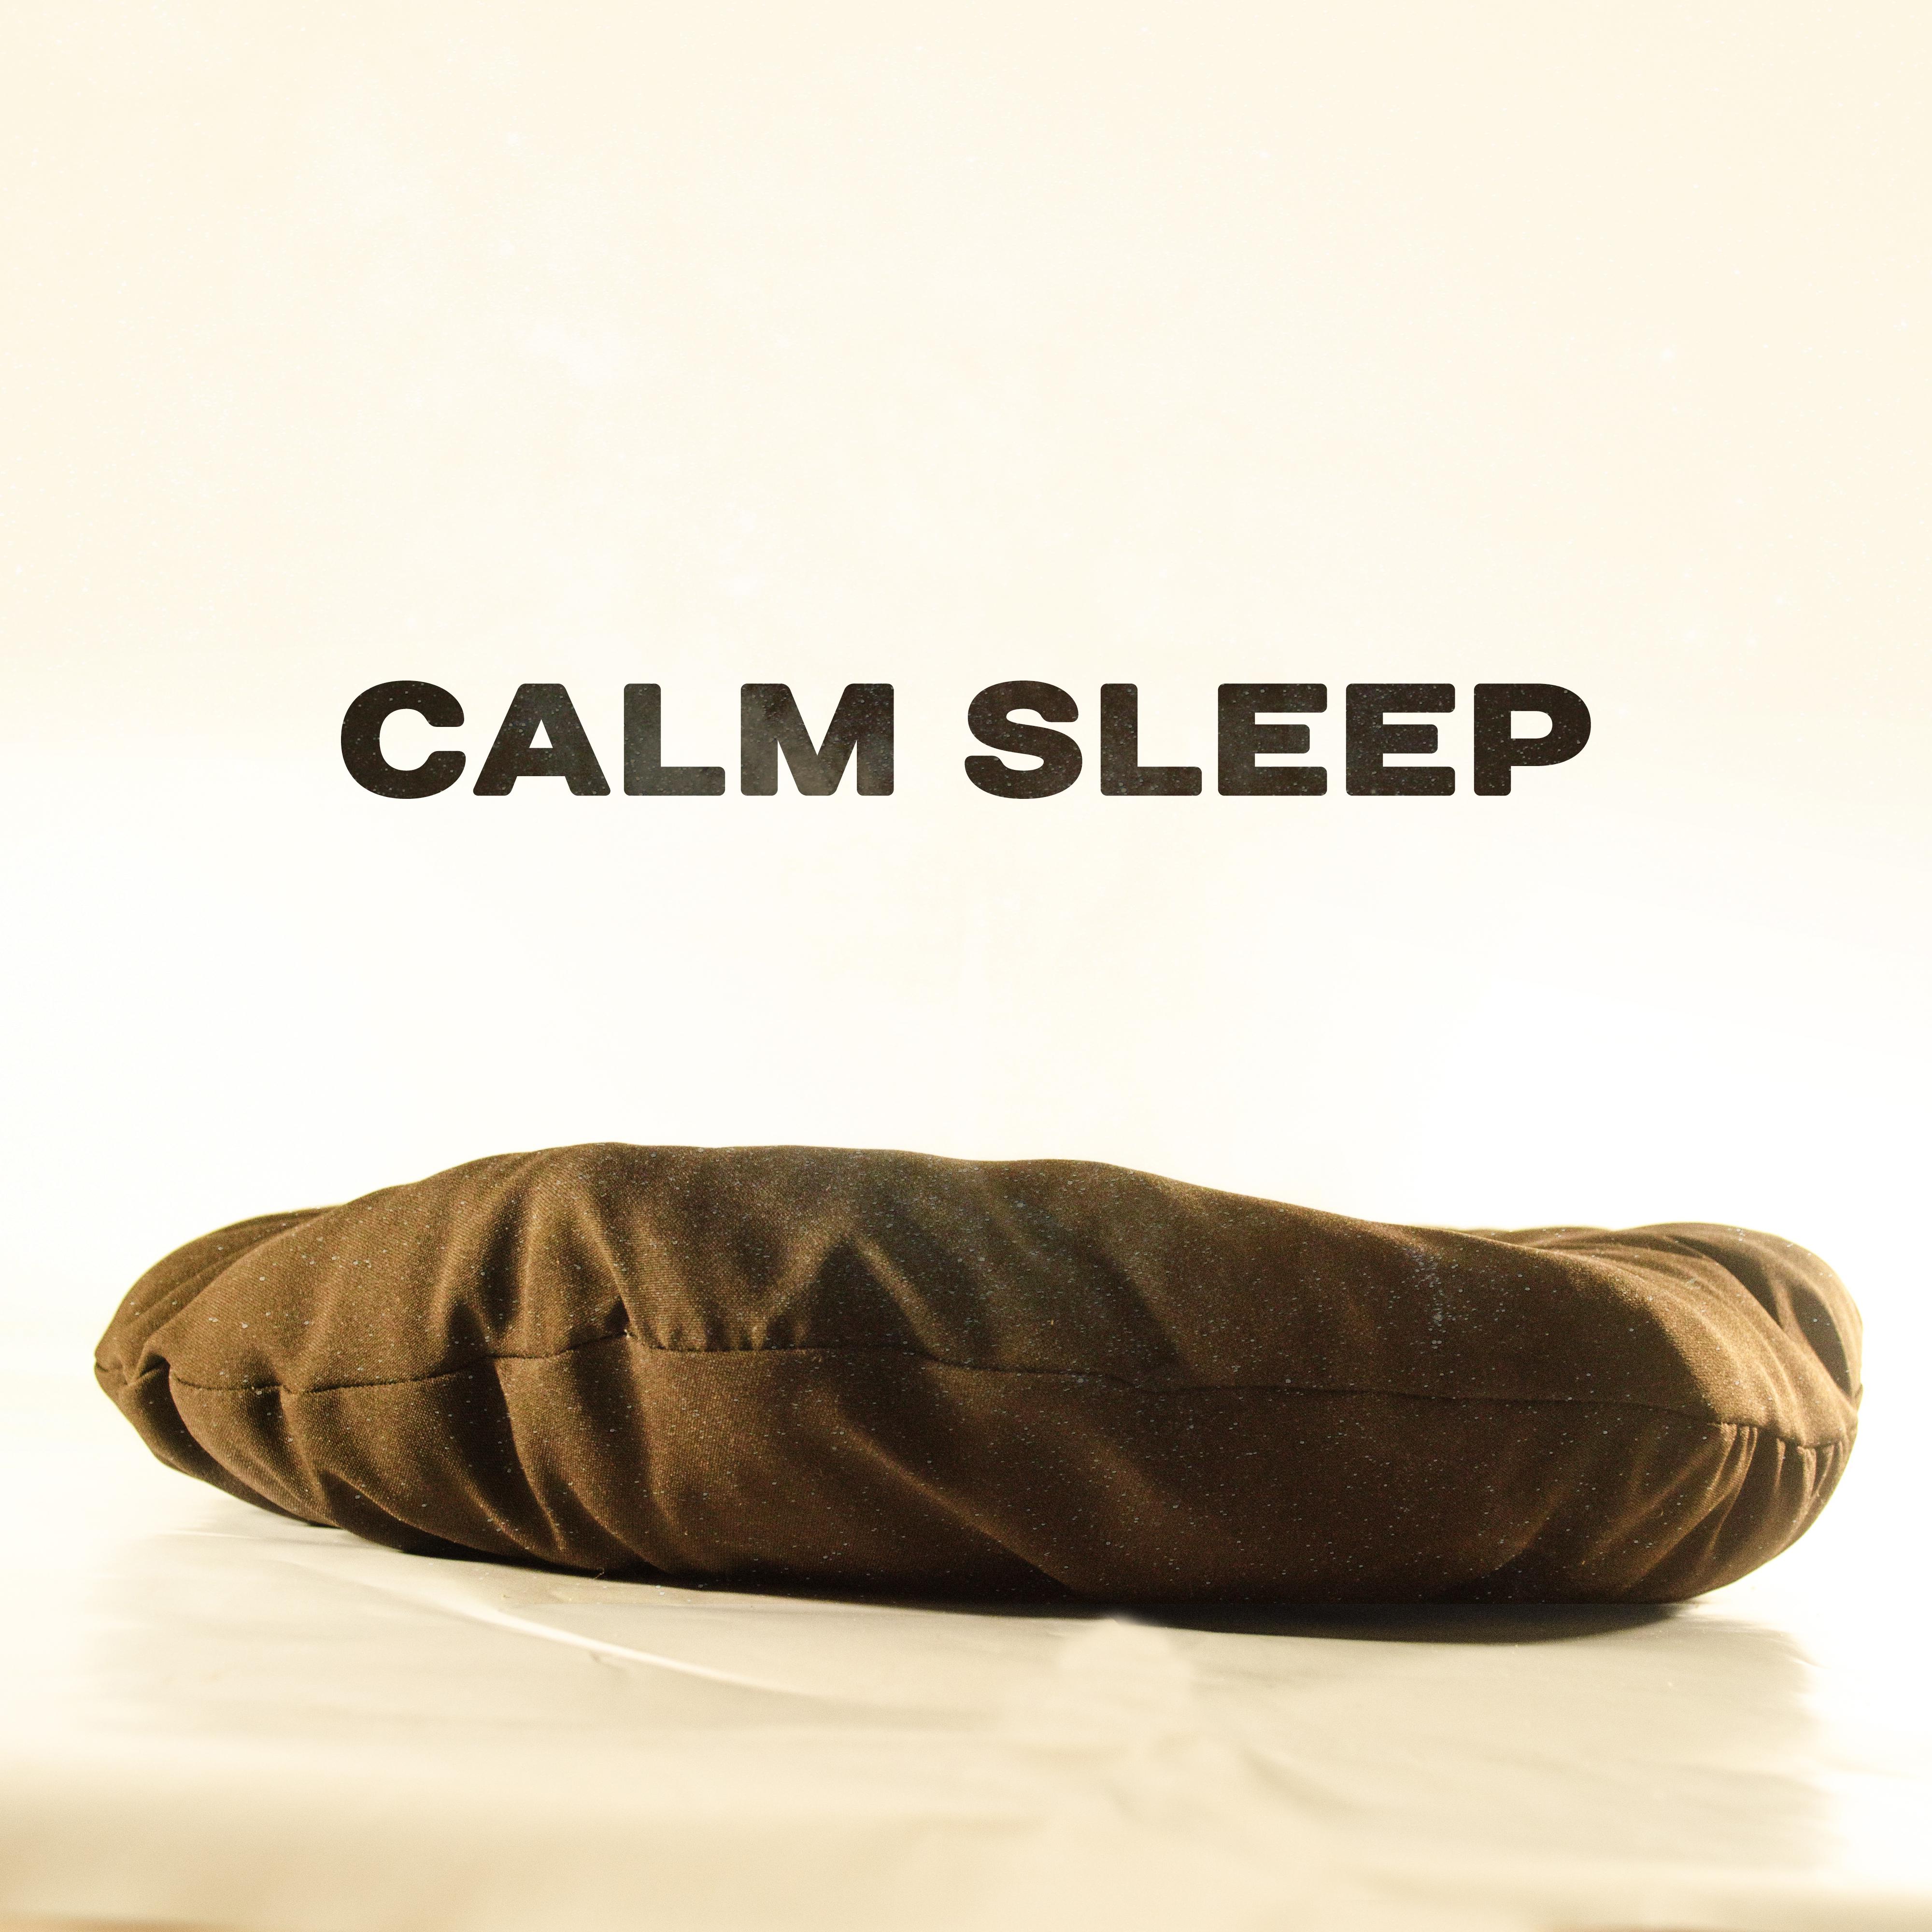 Calm Sleep – Relaxing Therapy at Goodnight, Peaceful Lullabies, Sweet Night, Relaxation, Soft Melodies, Easier Sleep, Relief